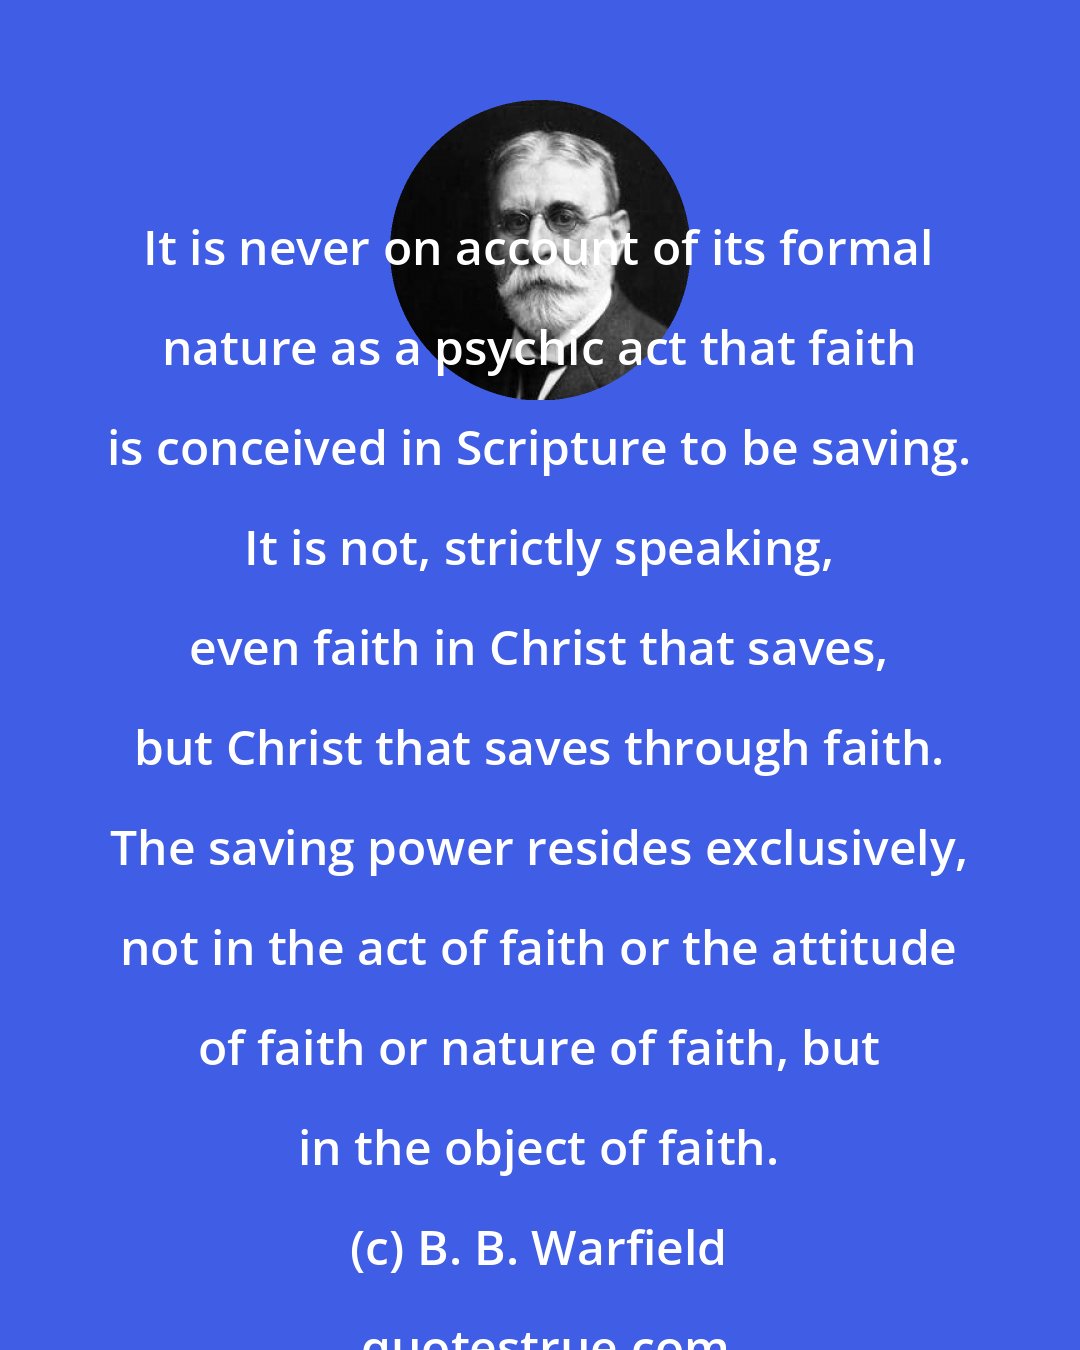 B. B. Warfield: It is never on account of its formal nature as a psychic act that faith is conceived in Scripture to be saving. It is not, strictly speaking, even faith in Christ that saves, but Christ that saves through faith. The saving power resides exclusively, not in the act of faith or the attitude of faith or nature of faith, but in the object of faith.